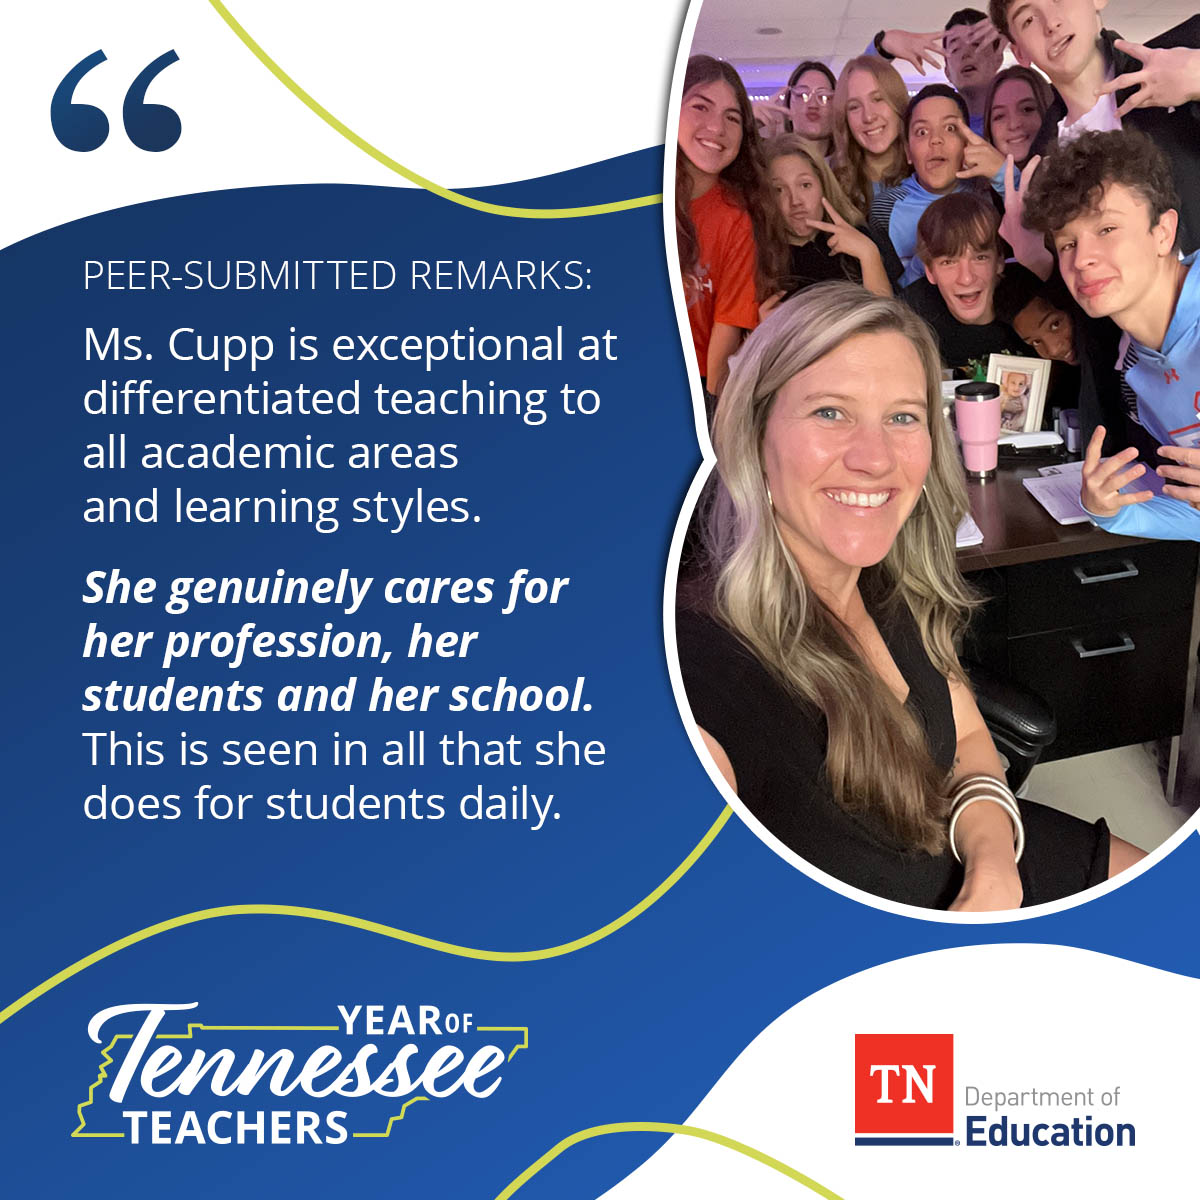 We'd like to spotlight Chelsea Cupp from @gcssdschools, who was nominated by her peers for her dedication to her students, school, and profession. #TNSupportsTeachers